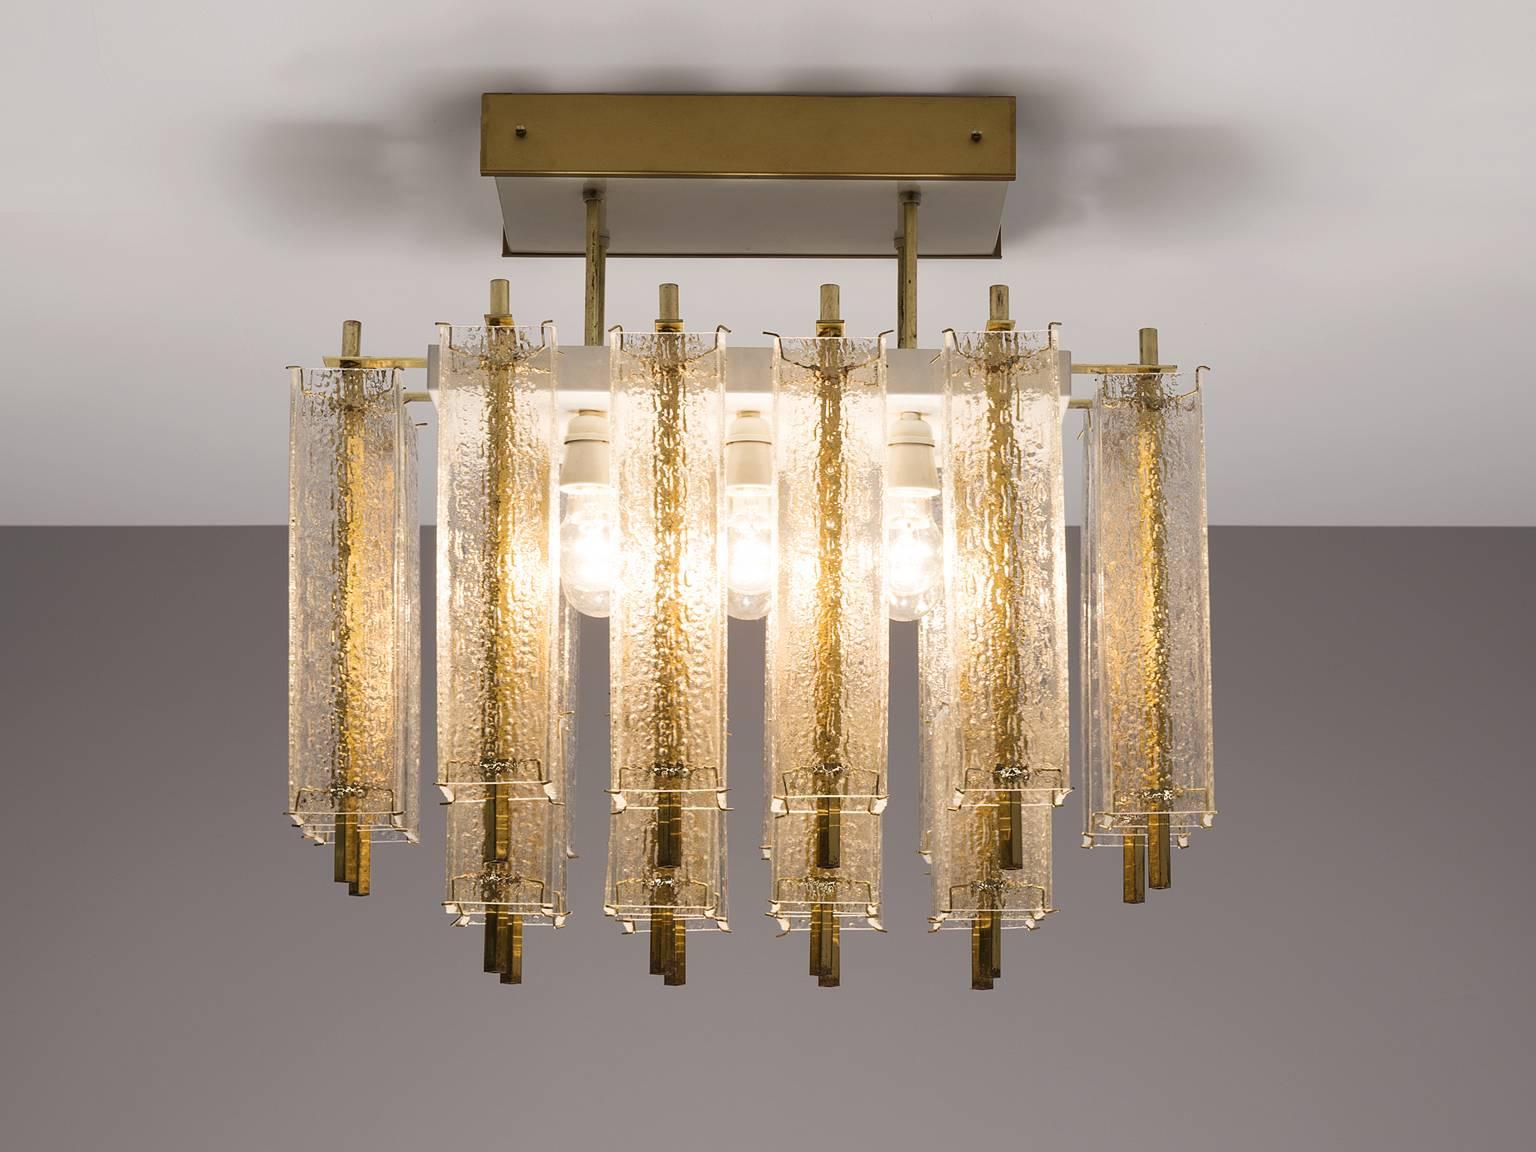 Chandelier, in glass and brass, Europe, 1970s. 

This elegant square chandelier features a great amount of rectangular structured glass shades and a rectangular brass fixture. The frame is made of brass and holds four brass pipes that have